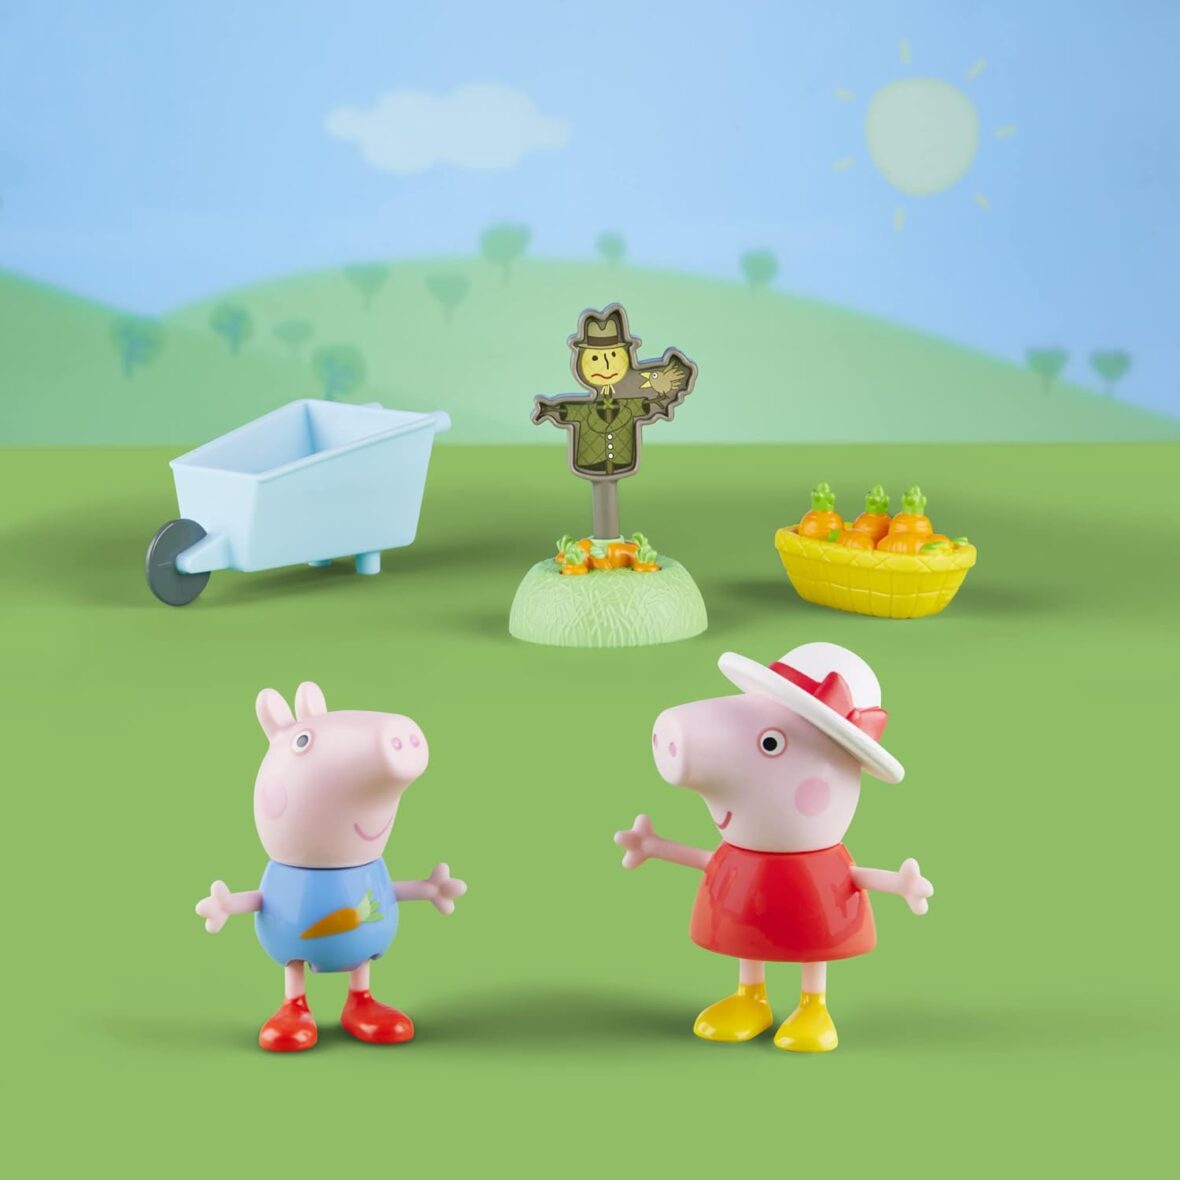 Peppa Pig Peppa’s Adventures Peppa’s Growing Garden Preschool Toy, with 2 Figures and 3 Accessories, for Ages 3 and Up